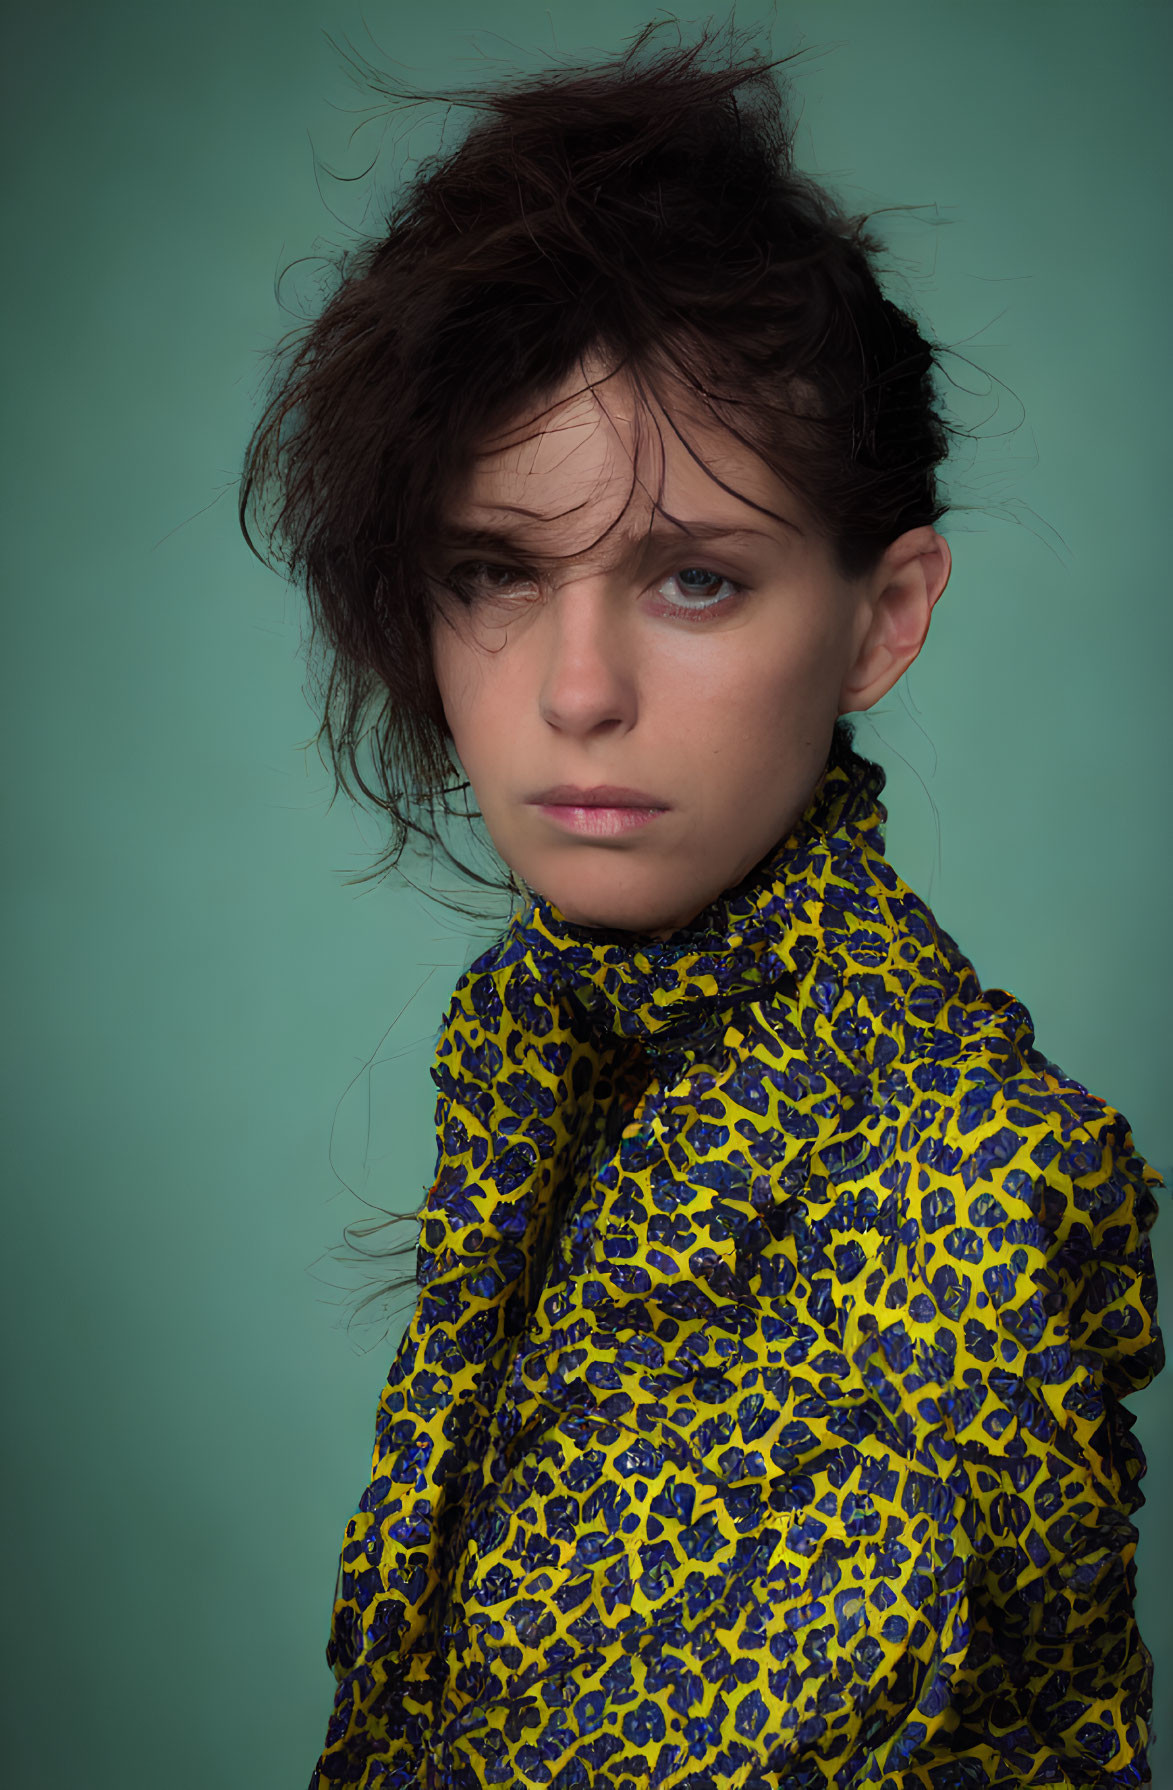 Tousled hair person in yellow and black top against teal background